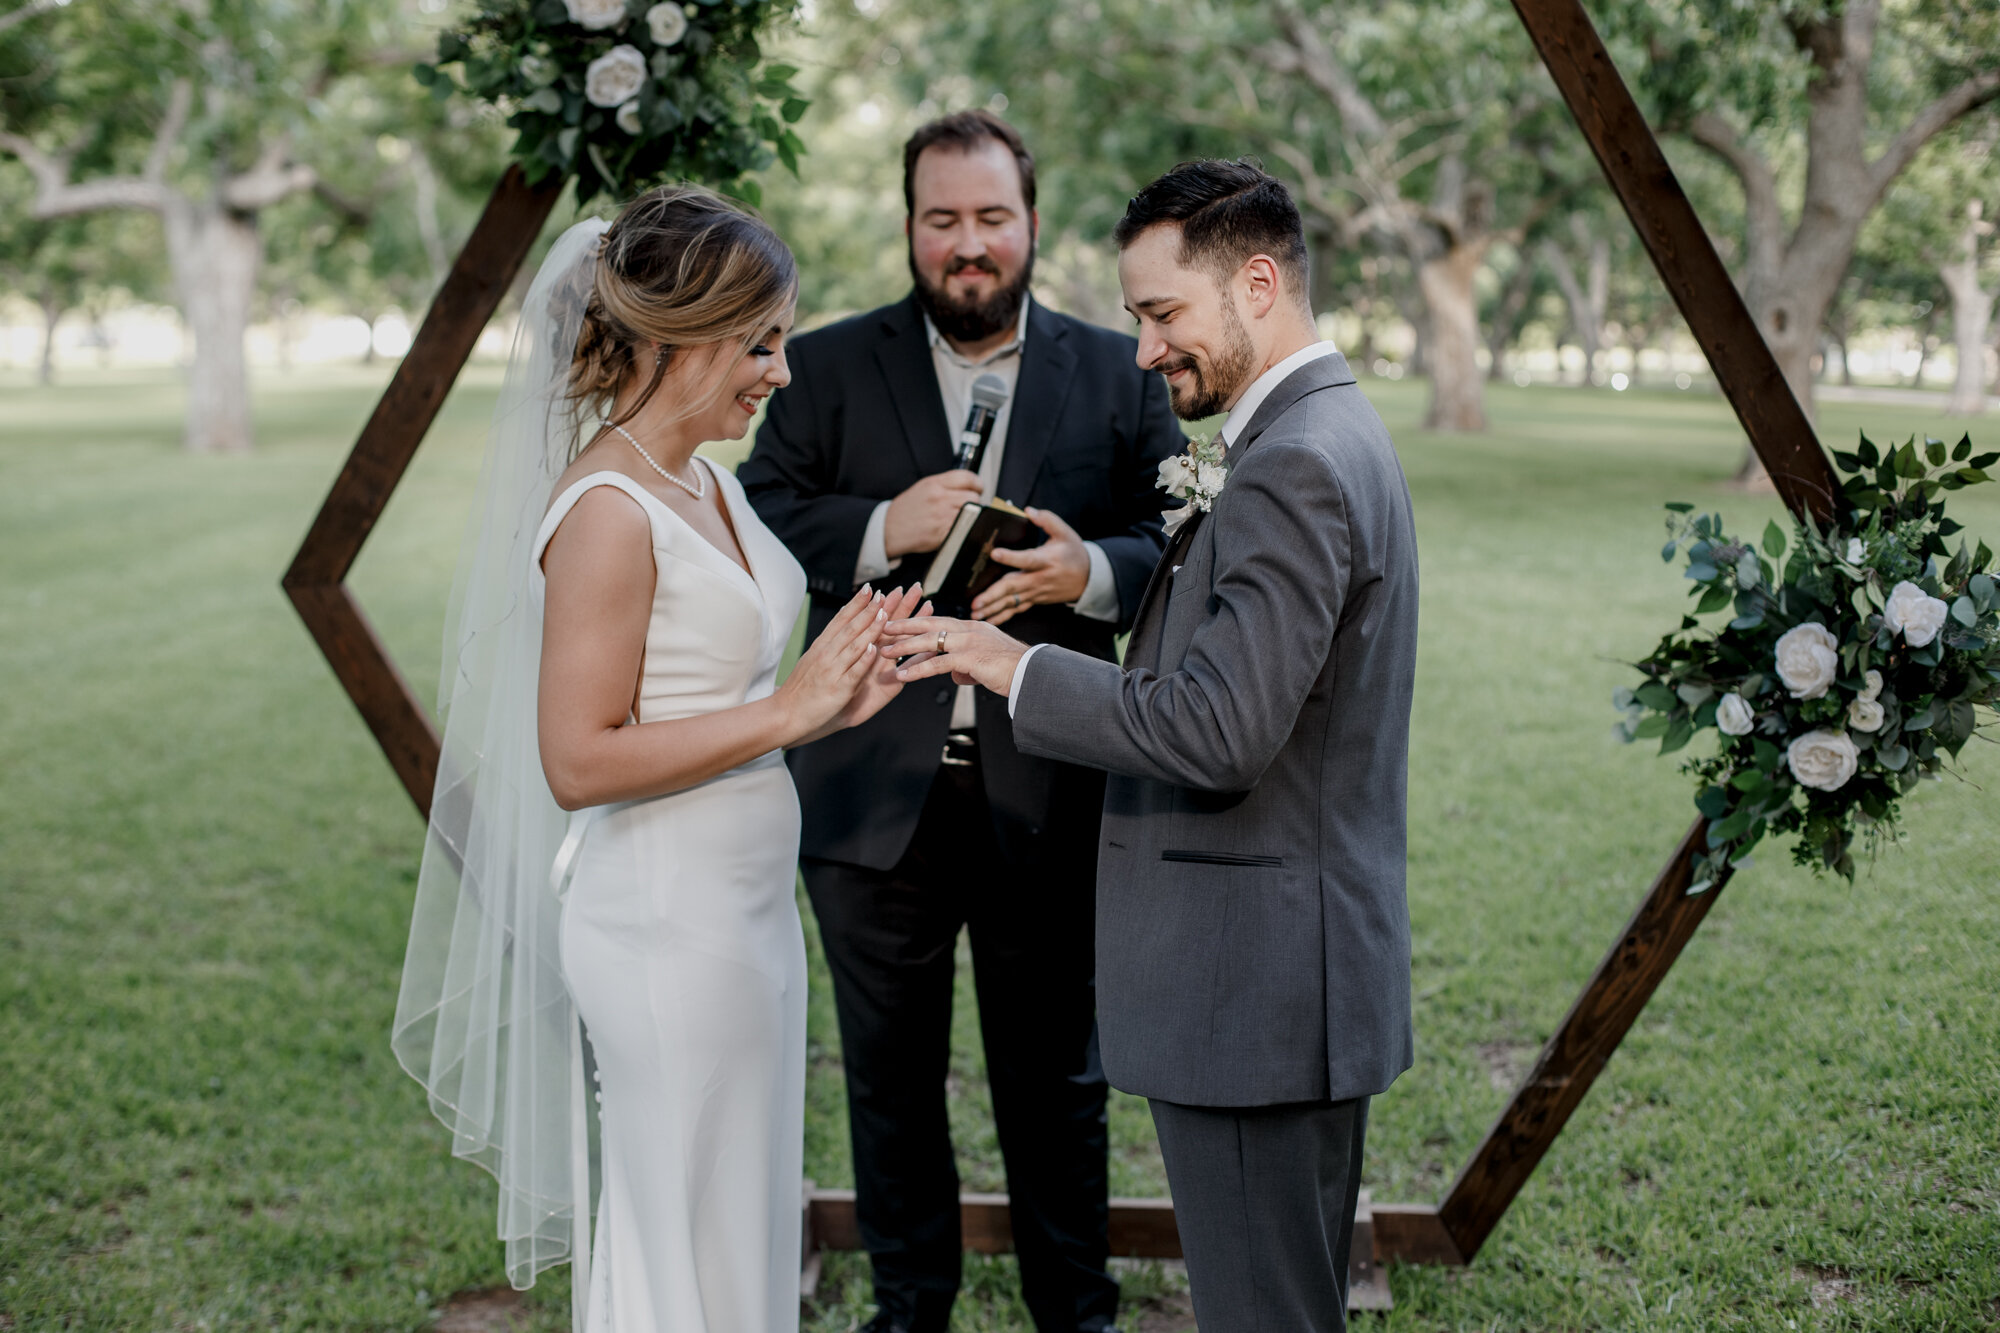 Bride and groom rings exchange. Glowing Wedding in Golden Champagne Tones at The Orchard at Caney Creek in Wharton, TX